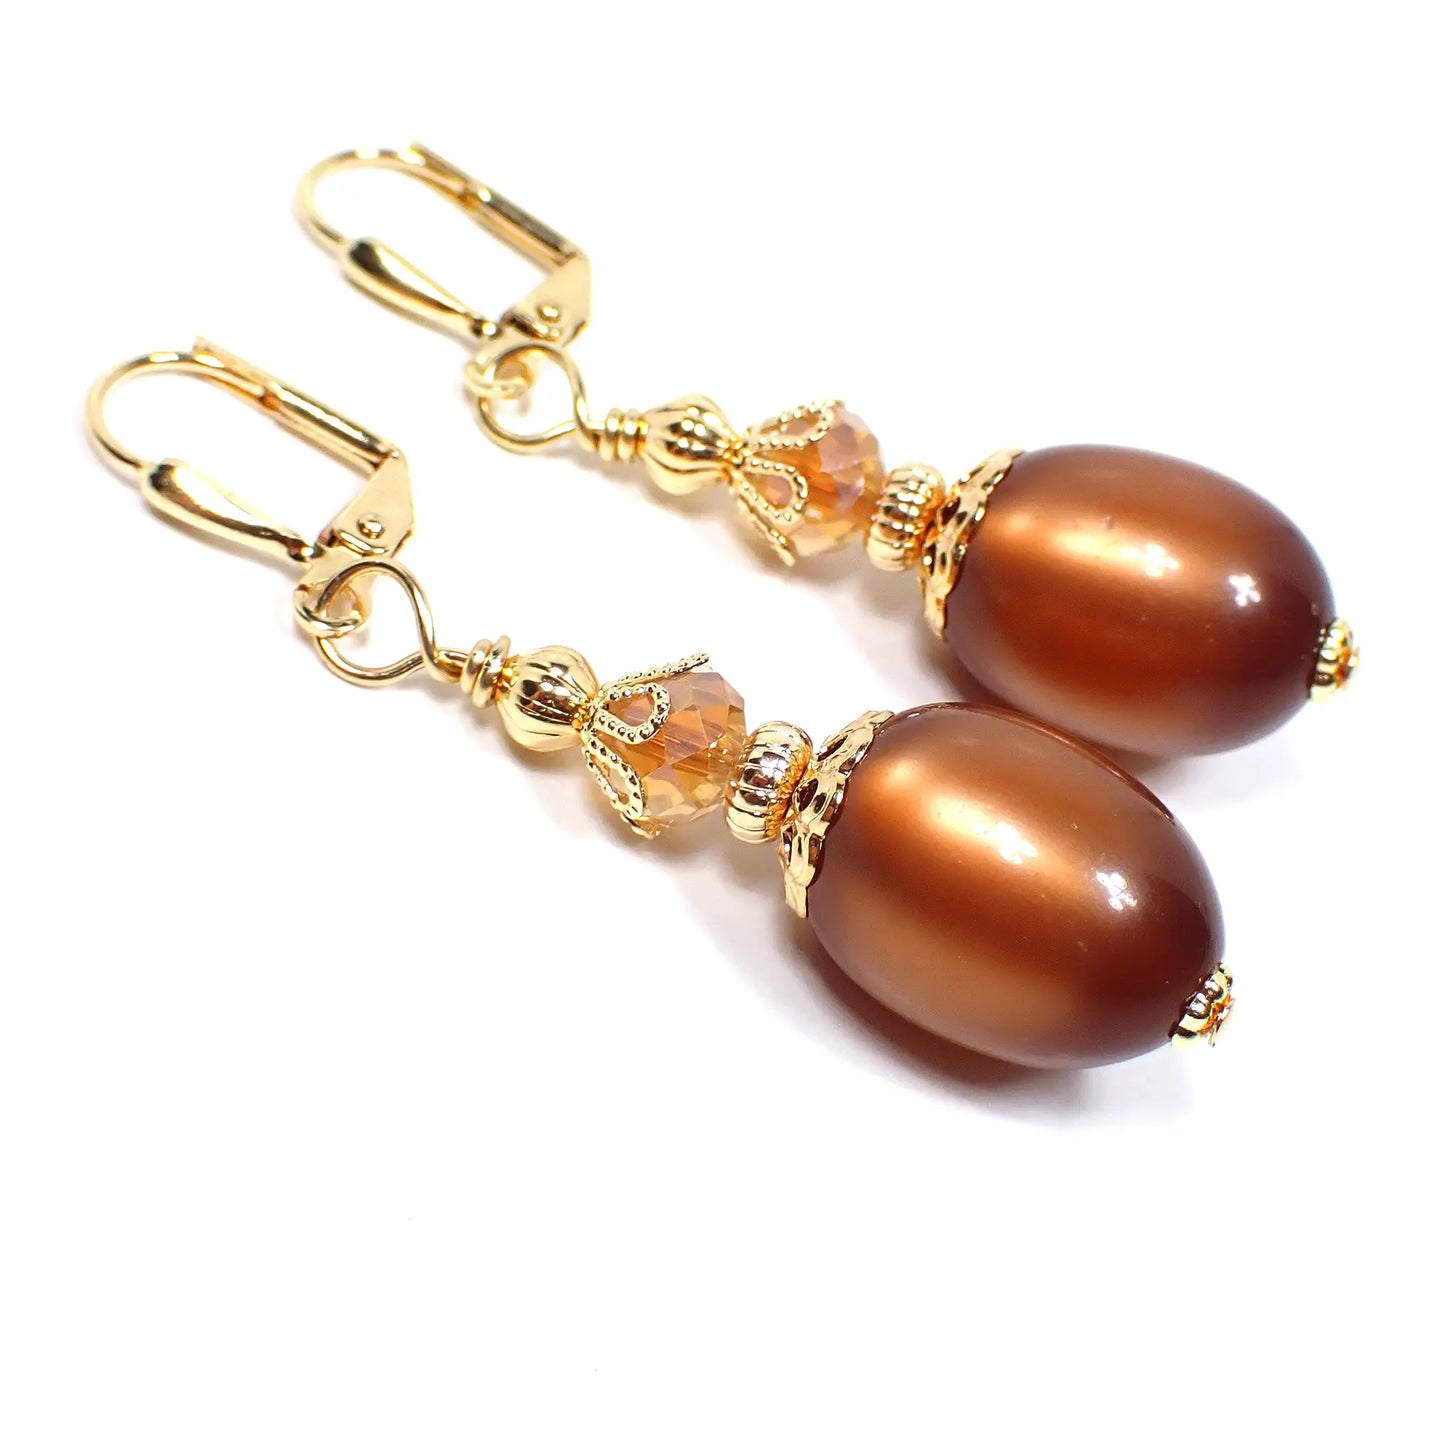 Golden Brown and Orange Moonglow Lucite Oval Handmade Drop Earrings Gold Plated Hook Lever Back or Clip On